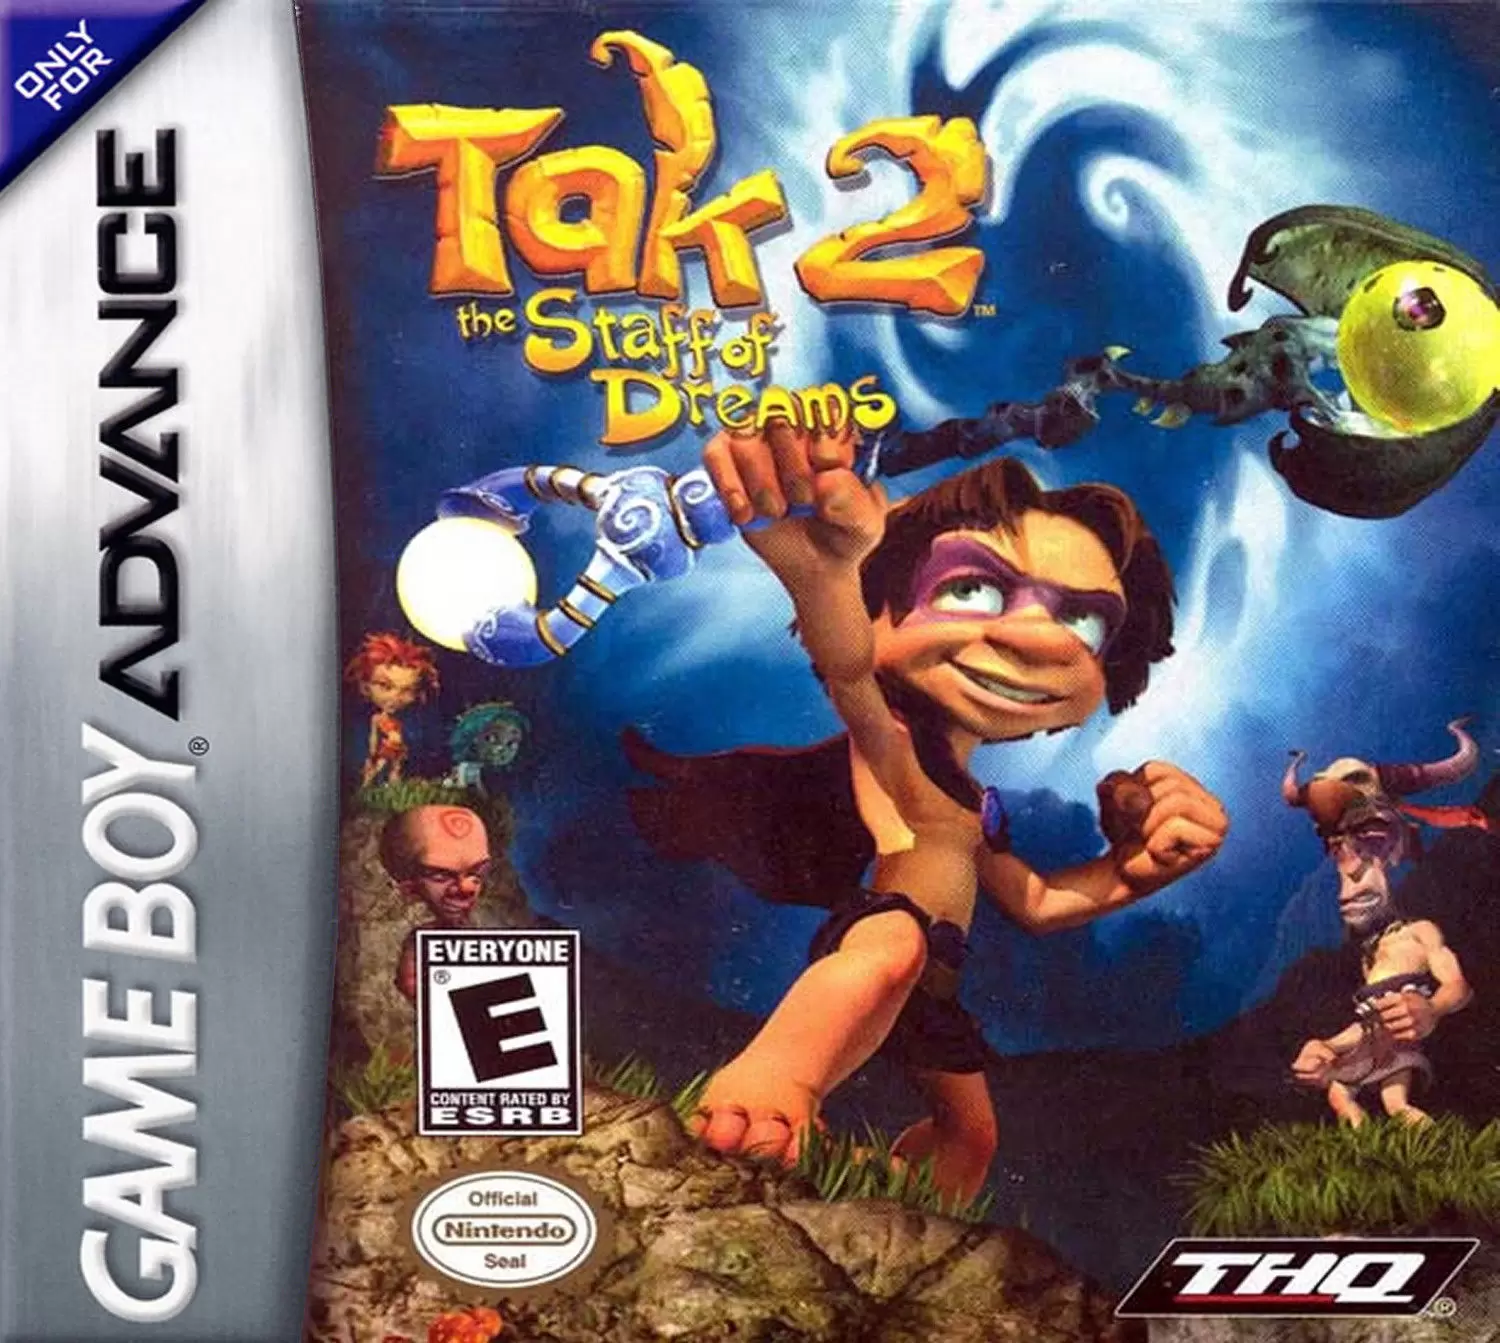 Game Boy Advance Games - Tak 2: The Staff of Dreams